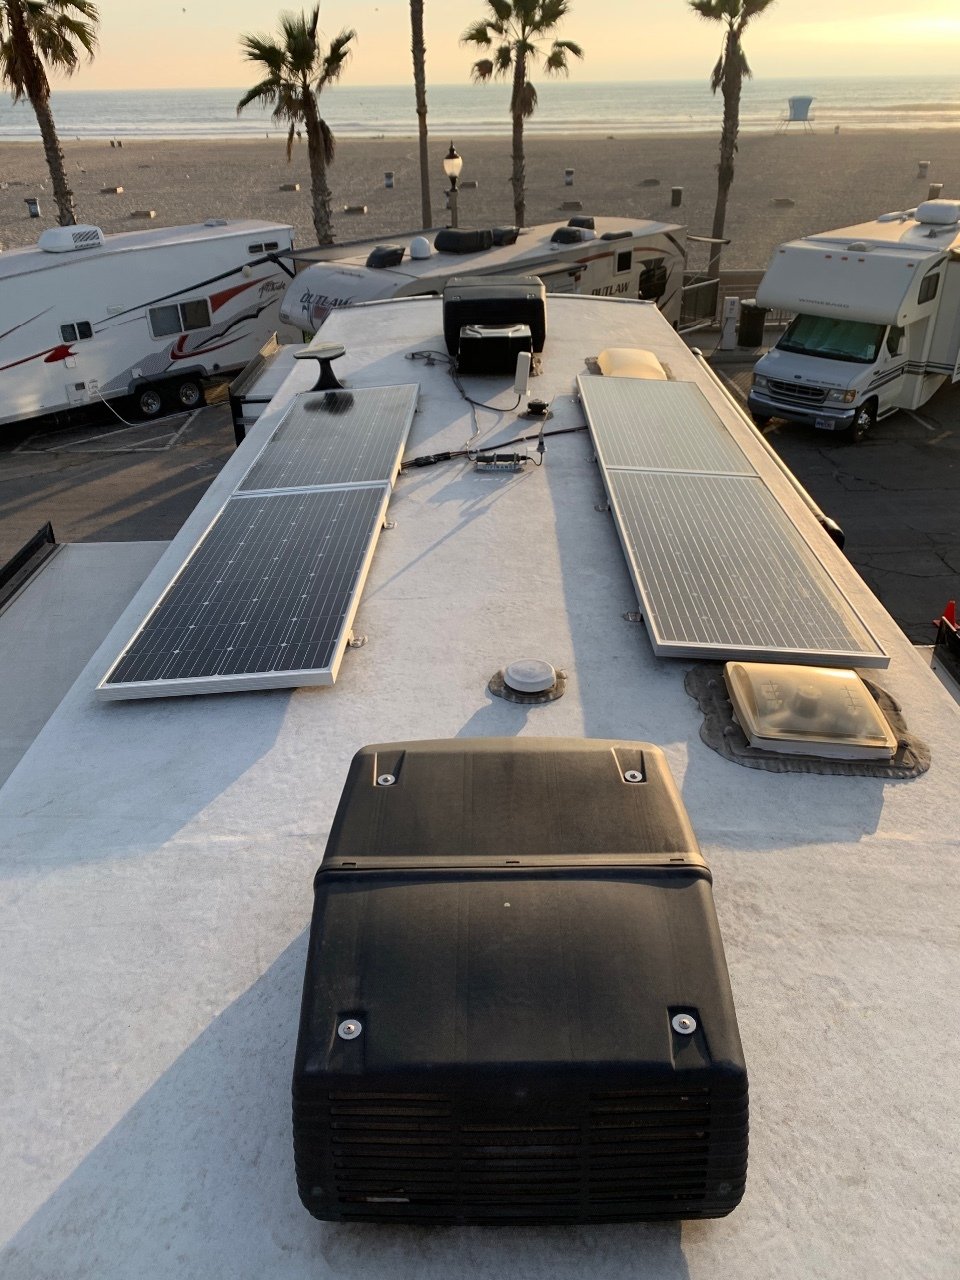 What multiple solar panels can look like installed on top of an RV